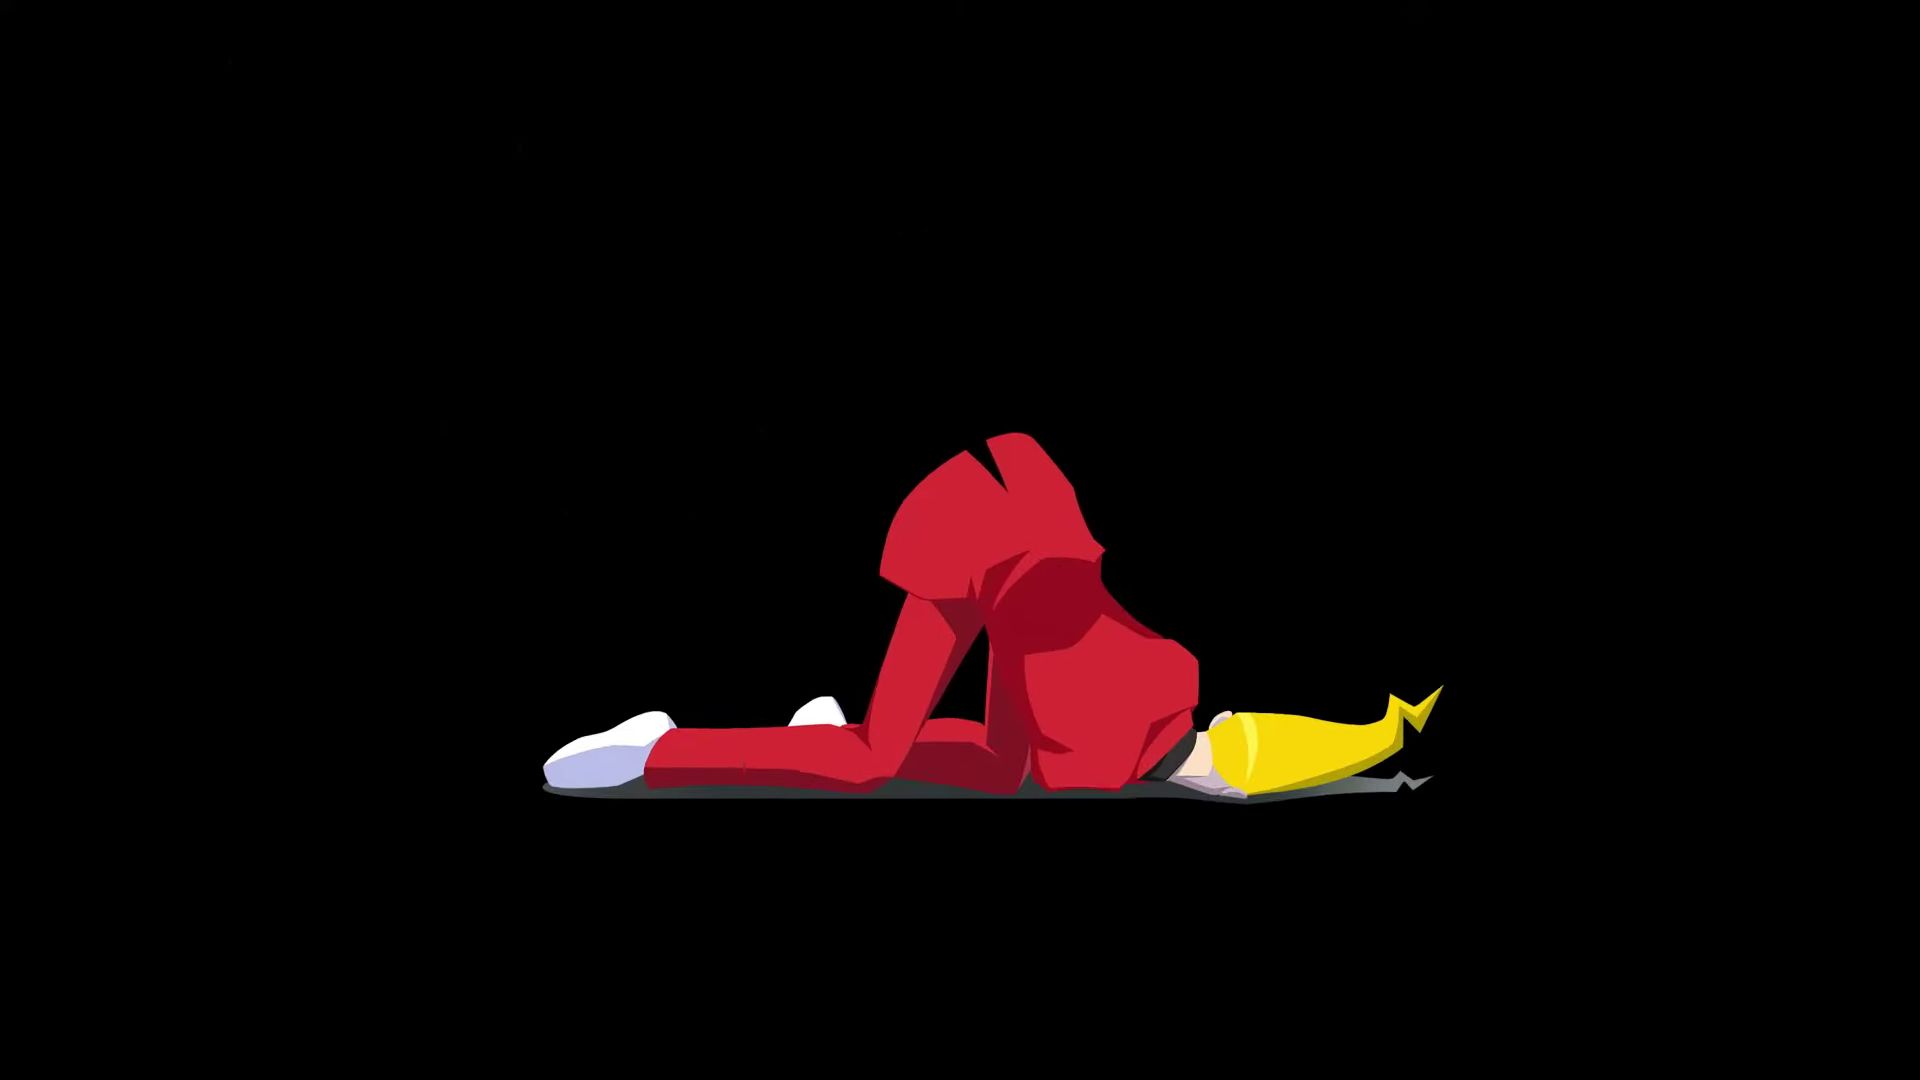 A screen from Ghost Trick's trailer showing recent murder victim Sissel, a man with a red suit and tall blond hair, lying in a heap against a black background